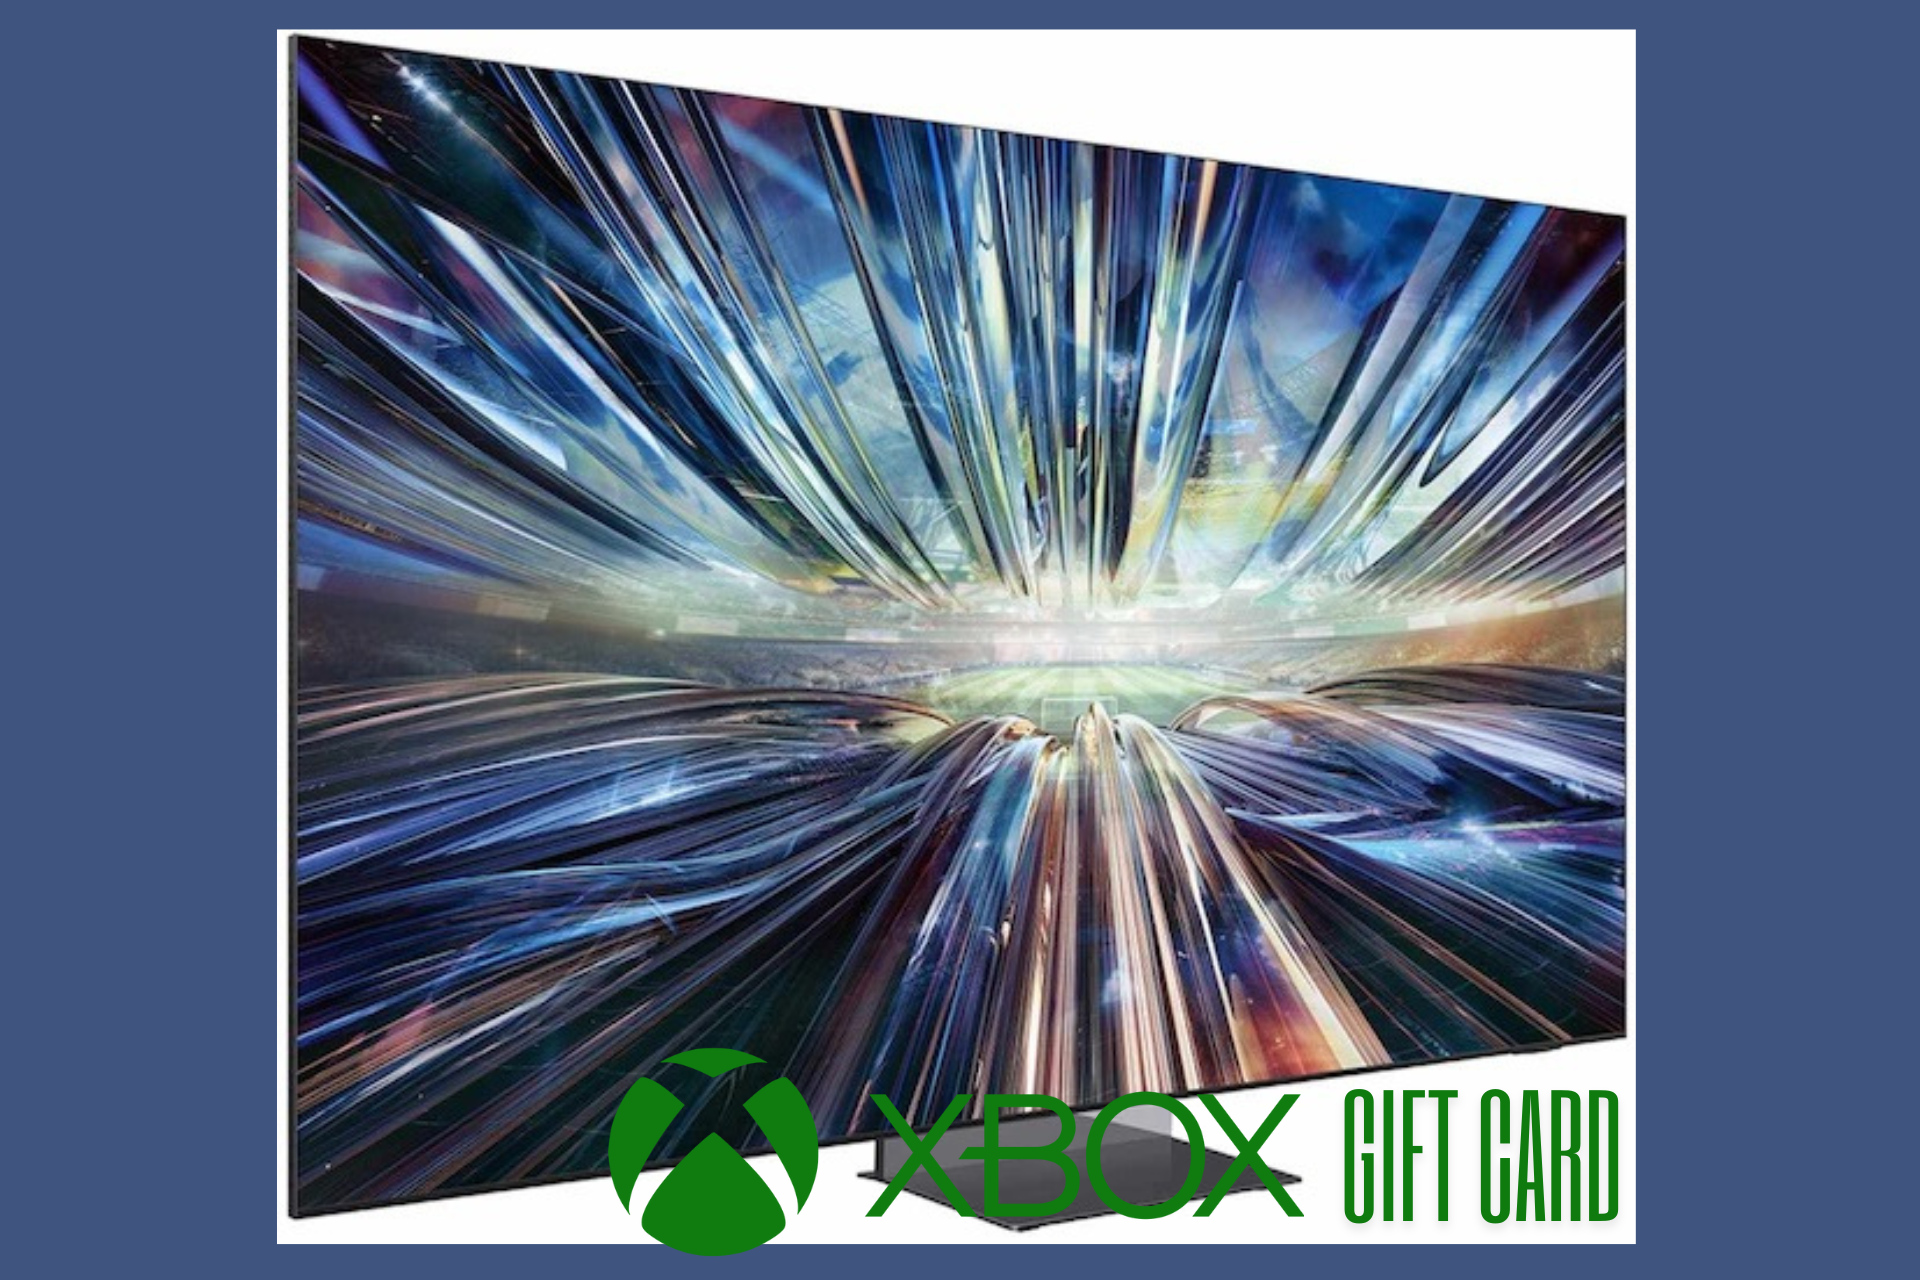 Get a $200 Xbox gift card with a new Samsung TV